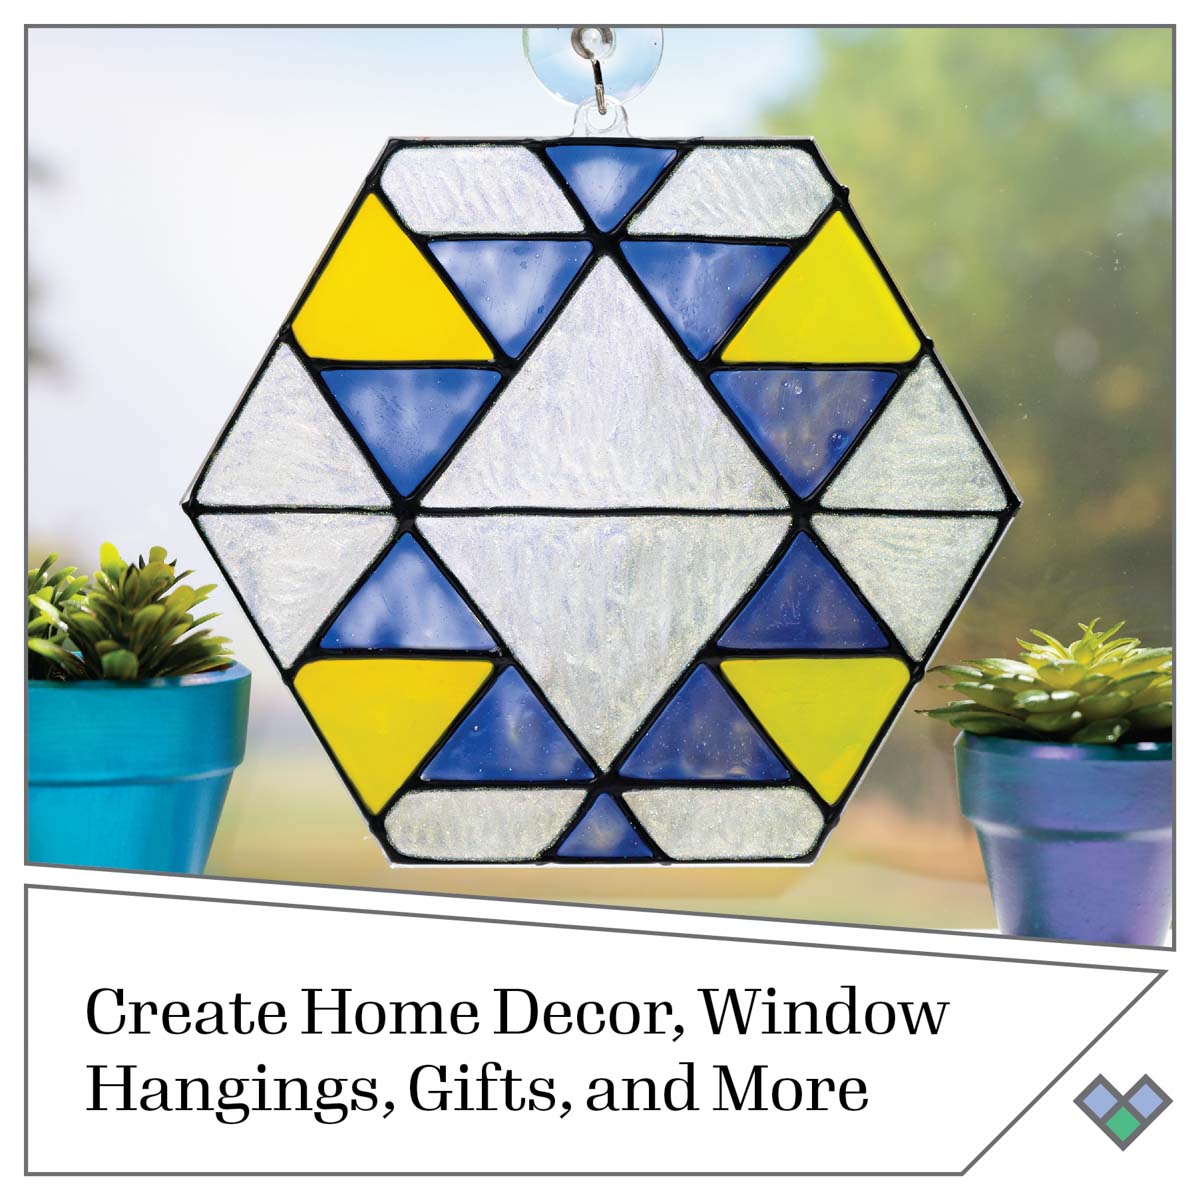 Gallery Glass ® Surfaces - Hexagon, 3 pc. - 19769